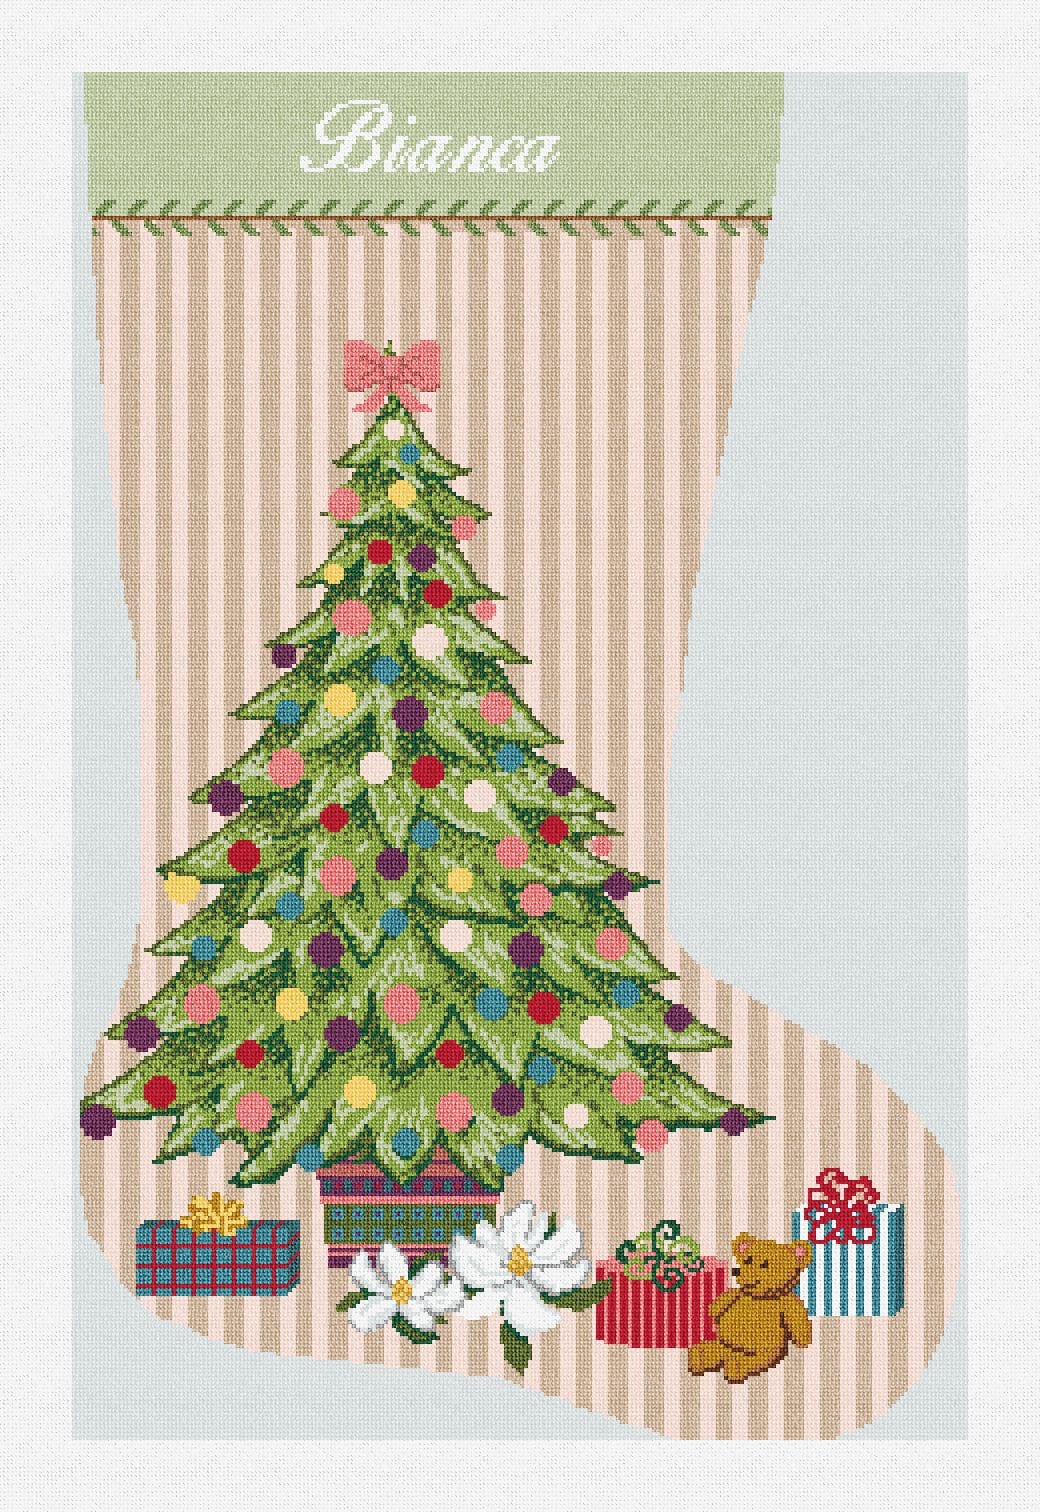 A needlepoint stocking kit called Merry Christmas Trees. The